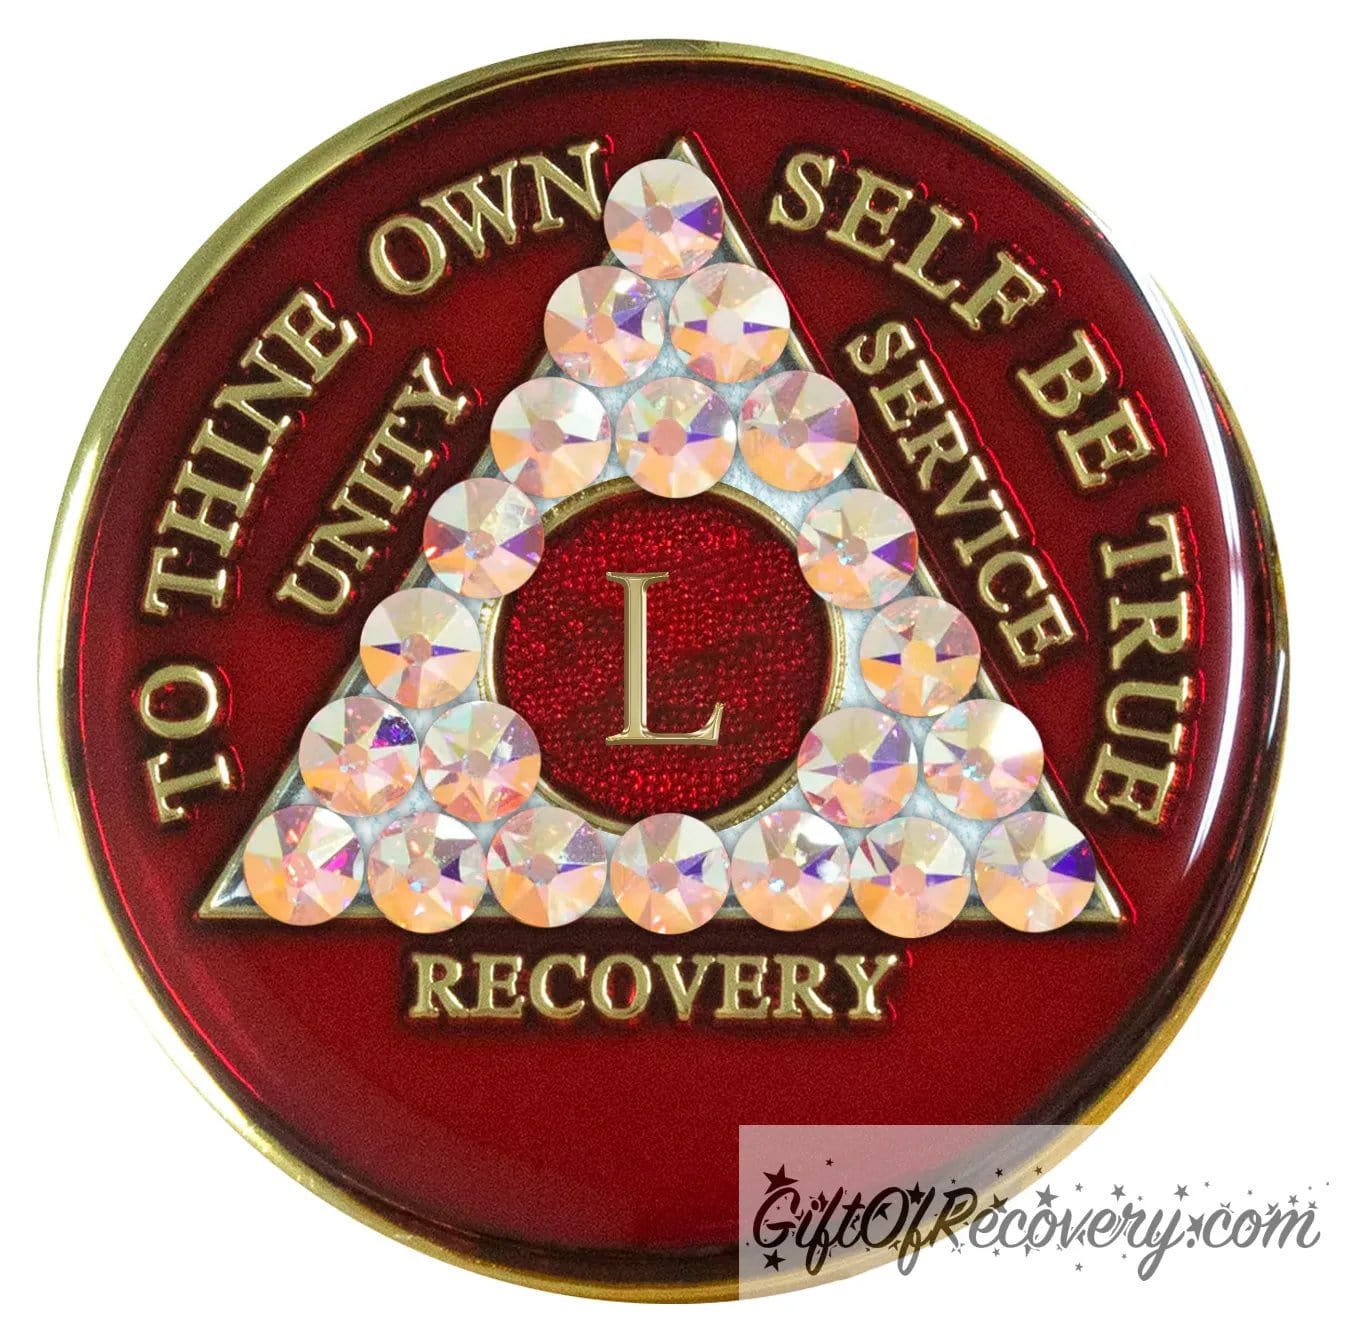 50 year AA medallion ruby red with 21 Aurora Borealis genuine crystals in the shape of the triangle and to thine own self be true, unity, service, recovery, and roman numeral are embossed with 14k gold-plated brass, the medallion is sealed with resin for a shiny finish that lasts.